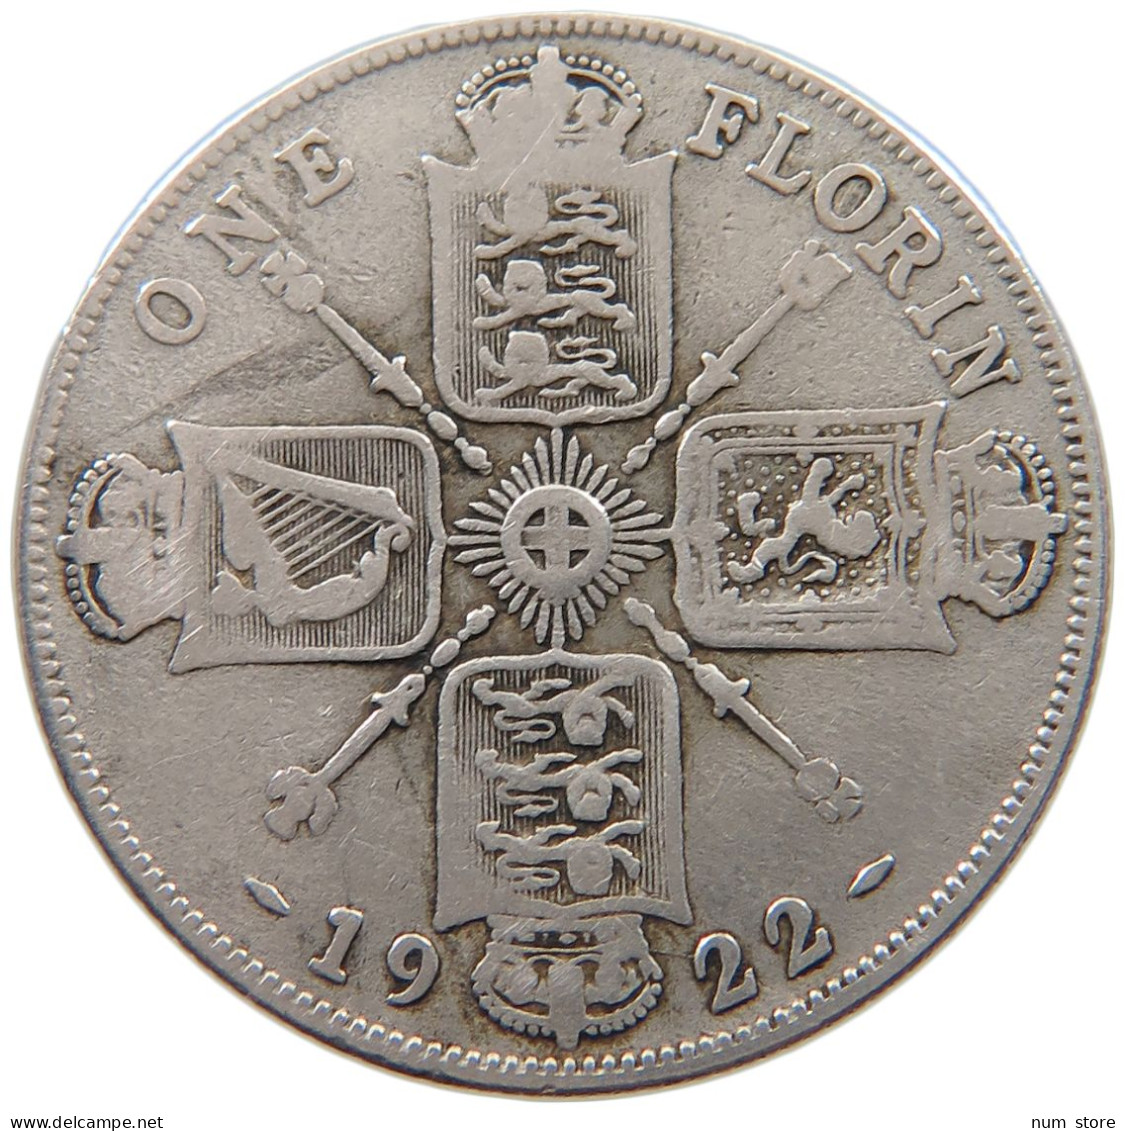 GREAT BRITAIN FLORIN 1922 George V. (1910-1936) #a057 0581 - J. 1 Florin / 2 Shillings